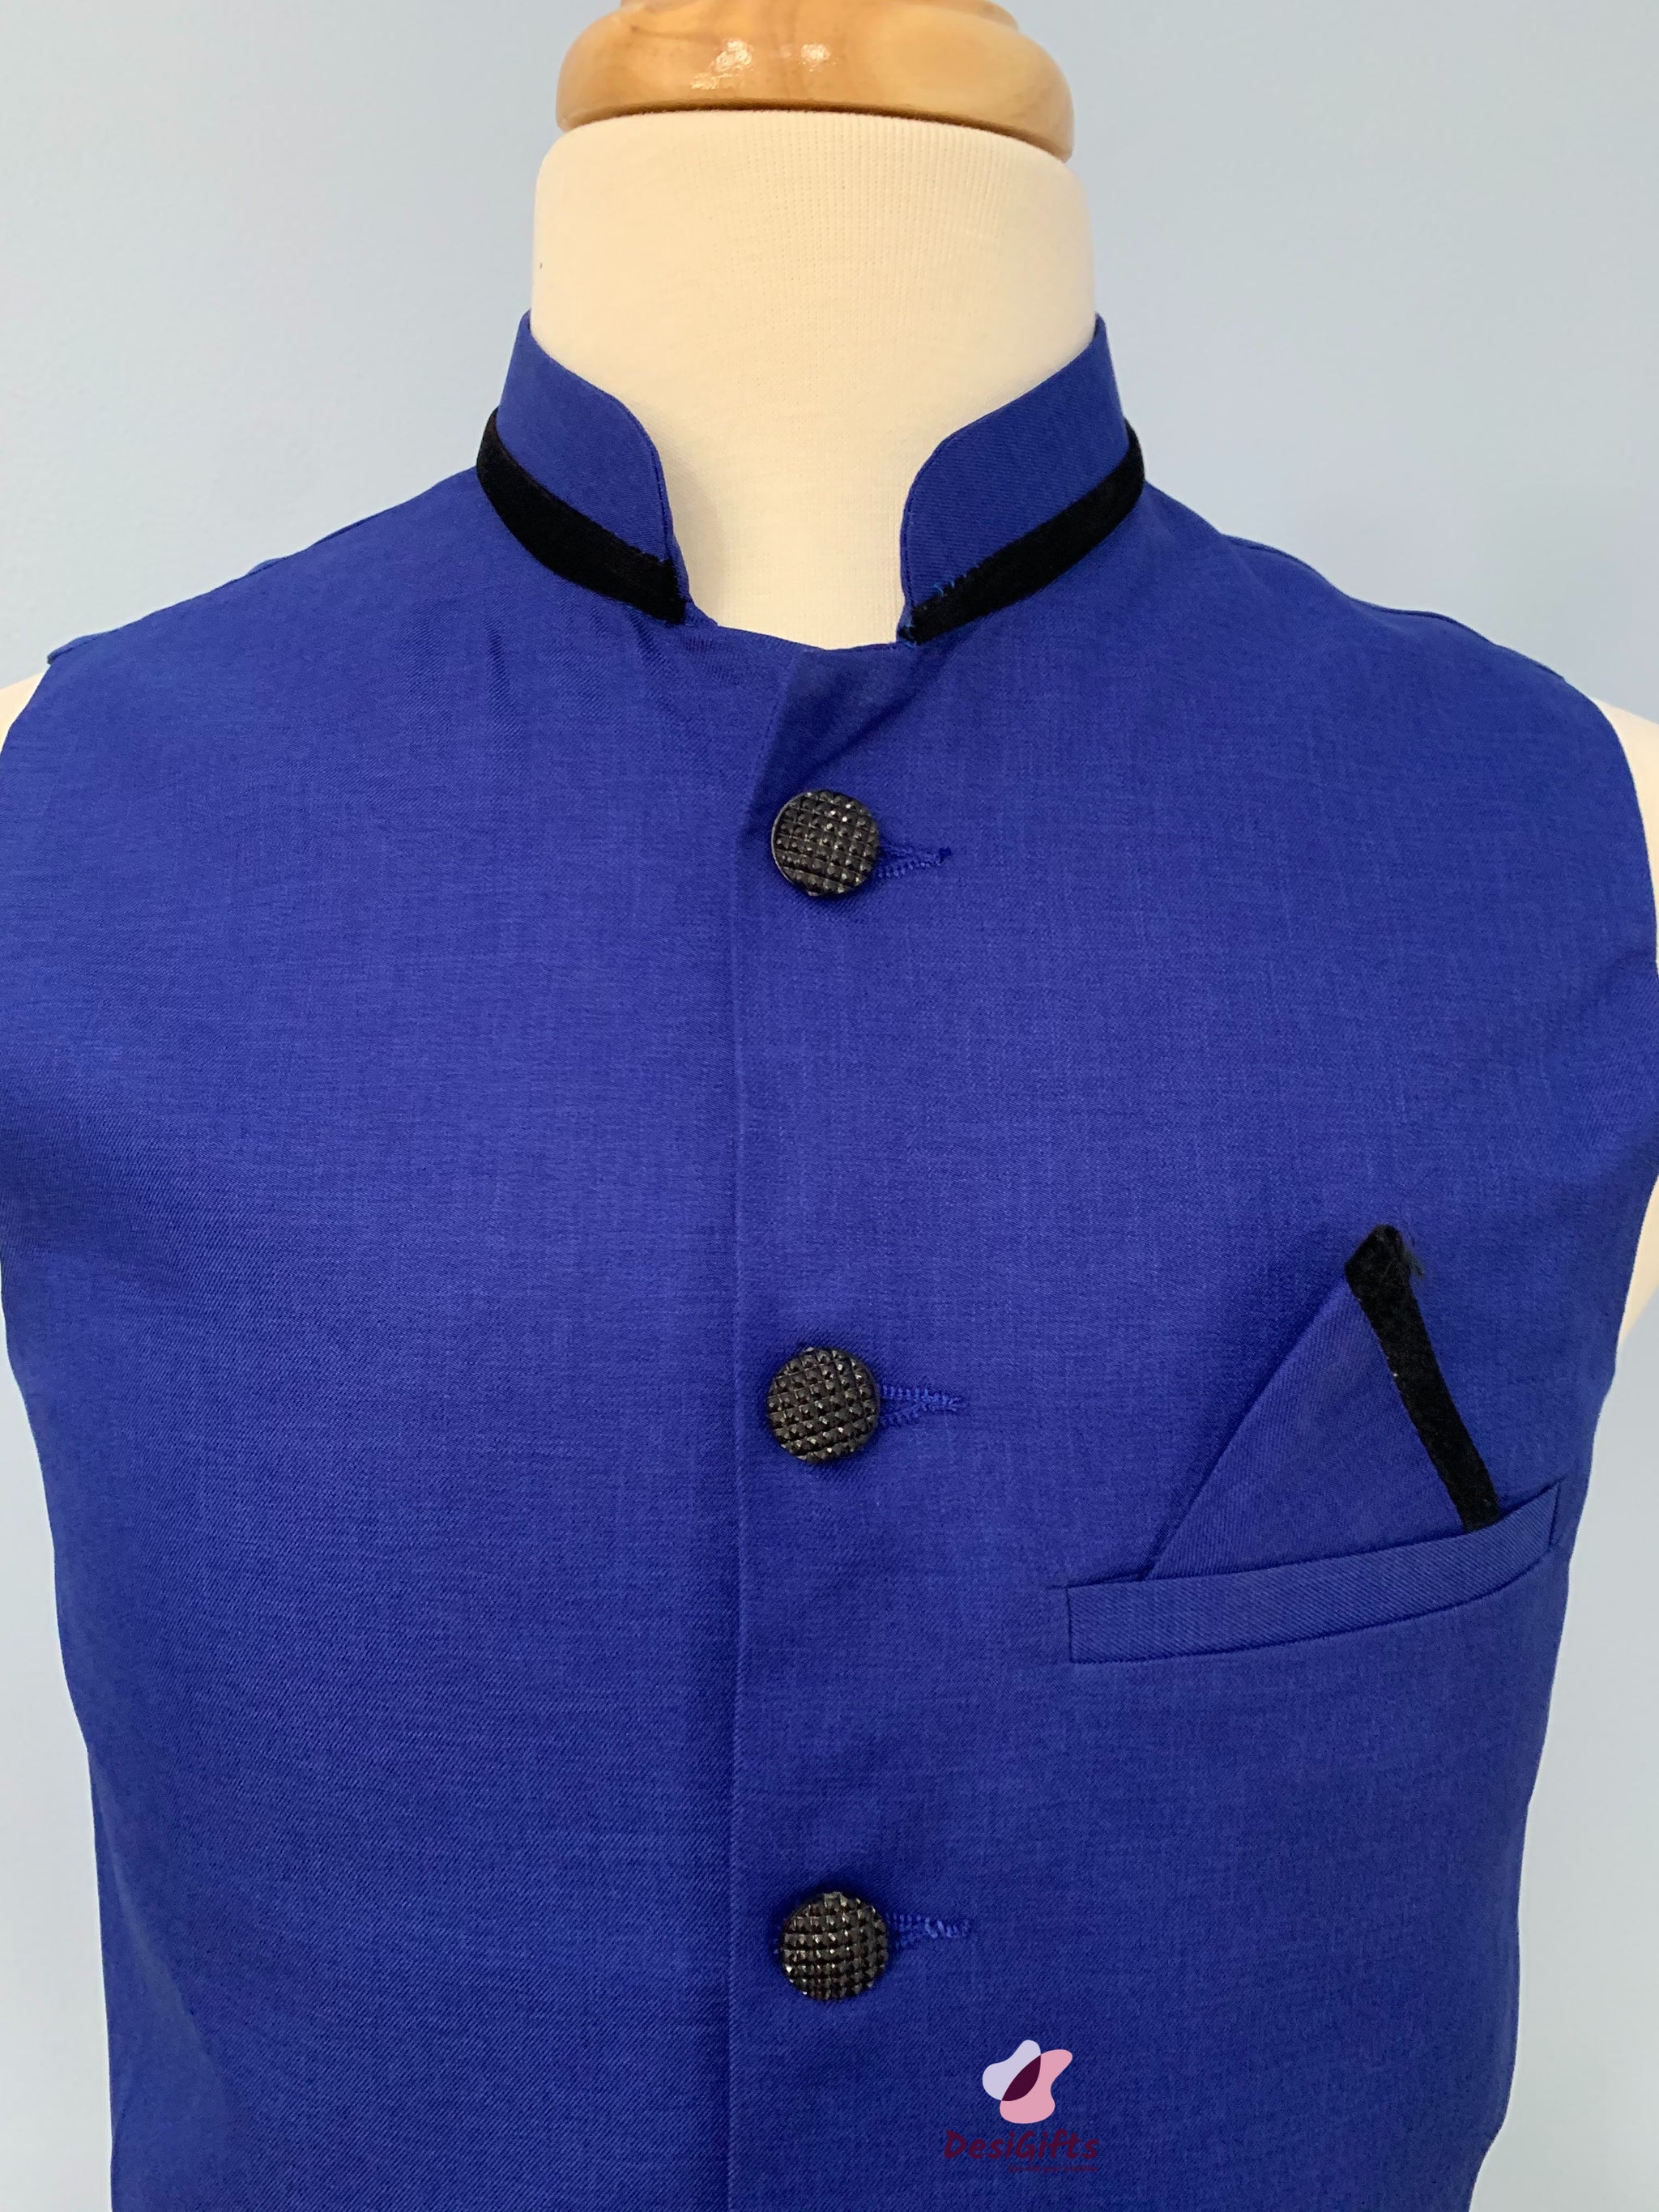 Cotton Plan Round Neck Yellow Colour Sleeveless Jacket In Ethnic Style Nehru  Jacket For Mens Age Group: 24 To 32 at Best Price in New Delhi | Akshara  Clothing